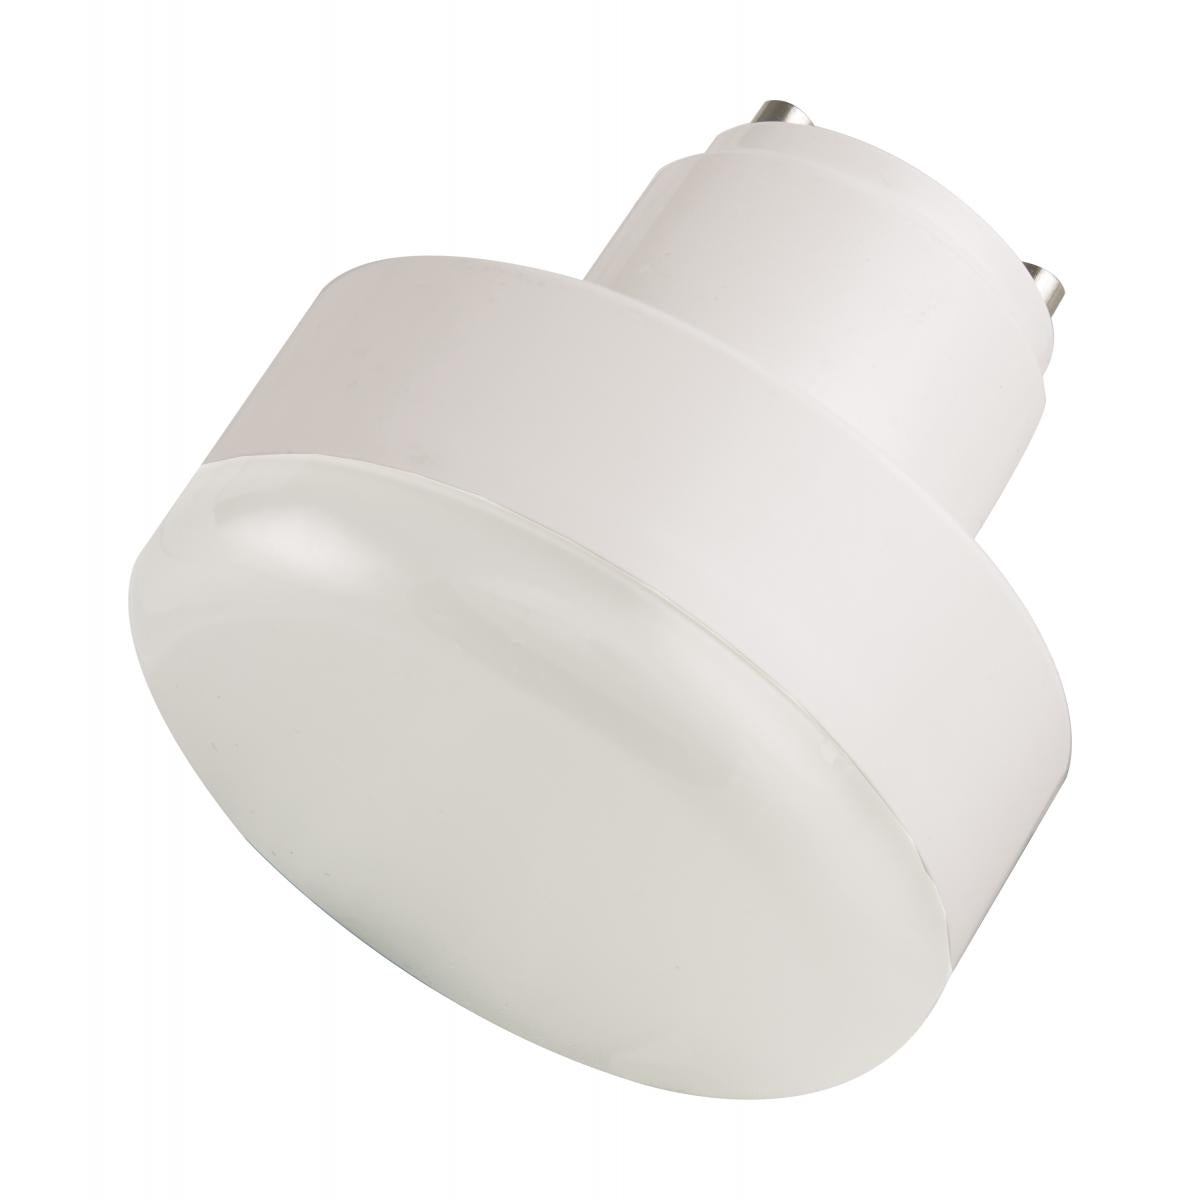 Replacement for TCP 33213SSP 13W GU24 Low Profile CFL 2700K -- LED ABOUT 1/2 INCH TALLER